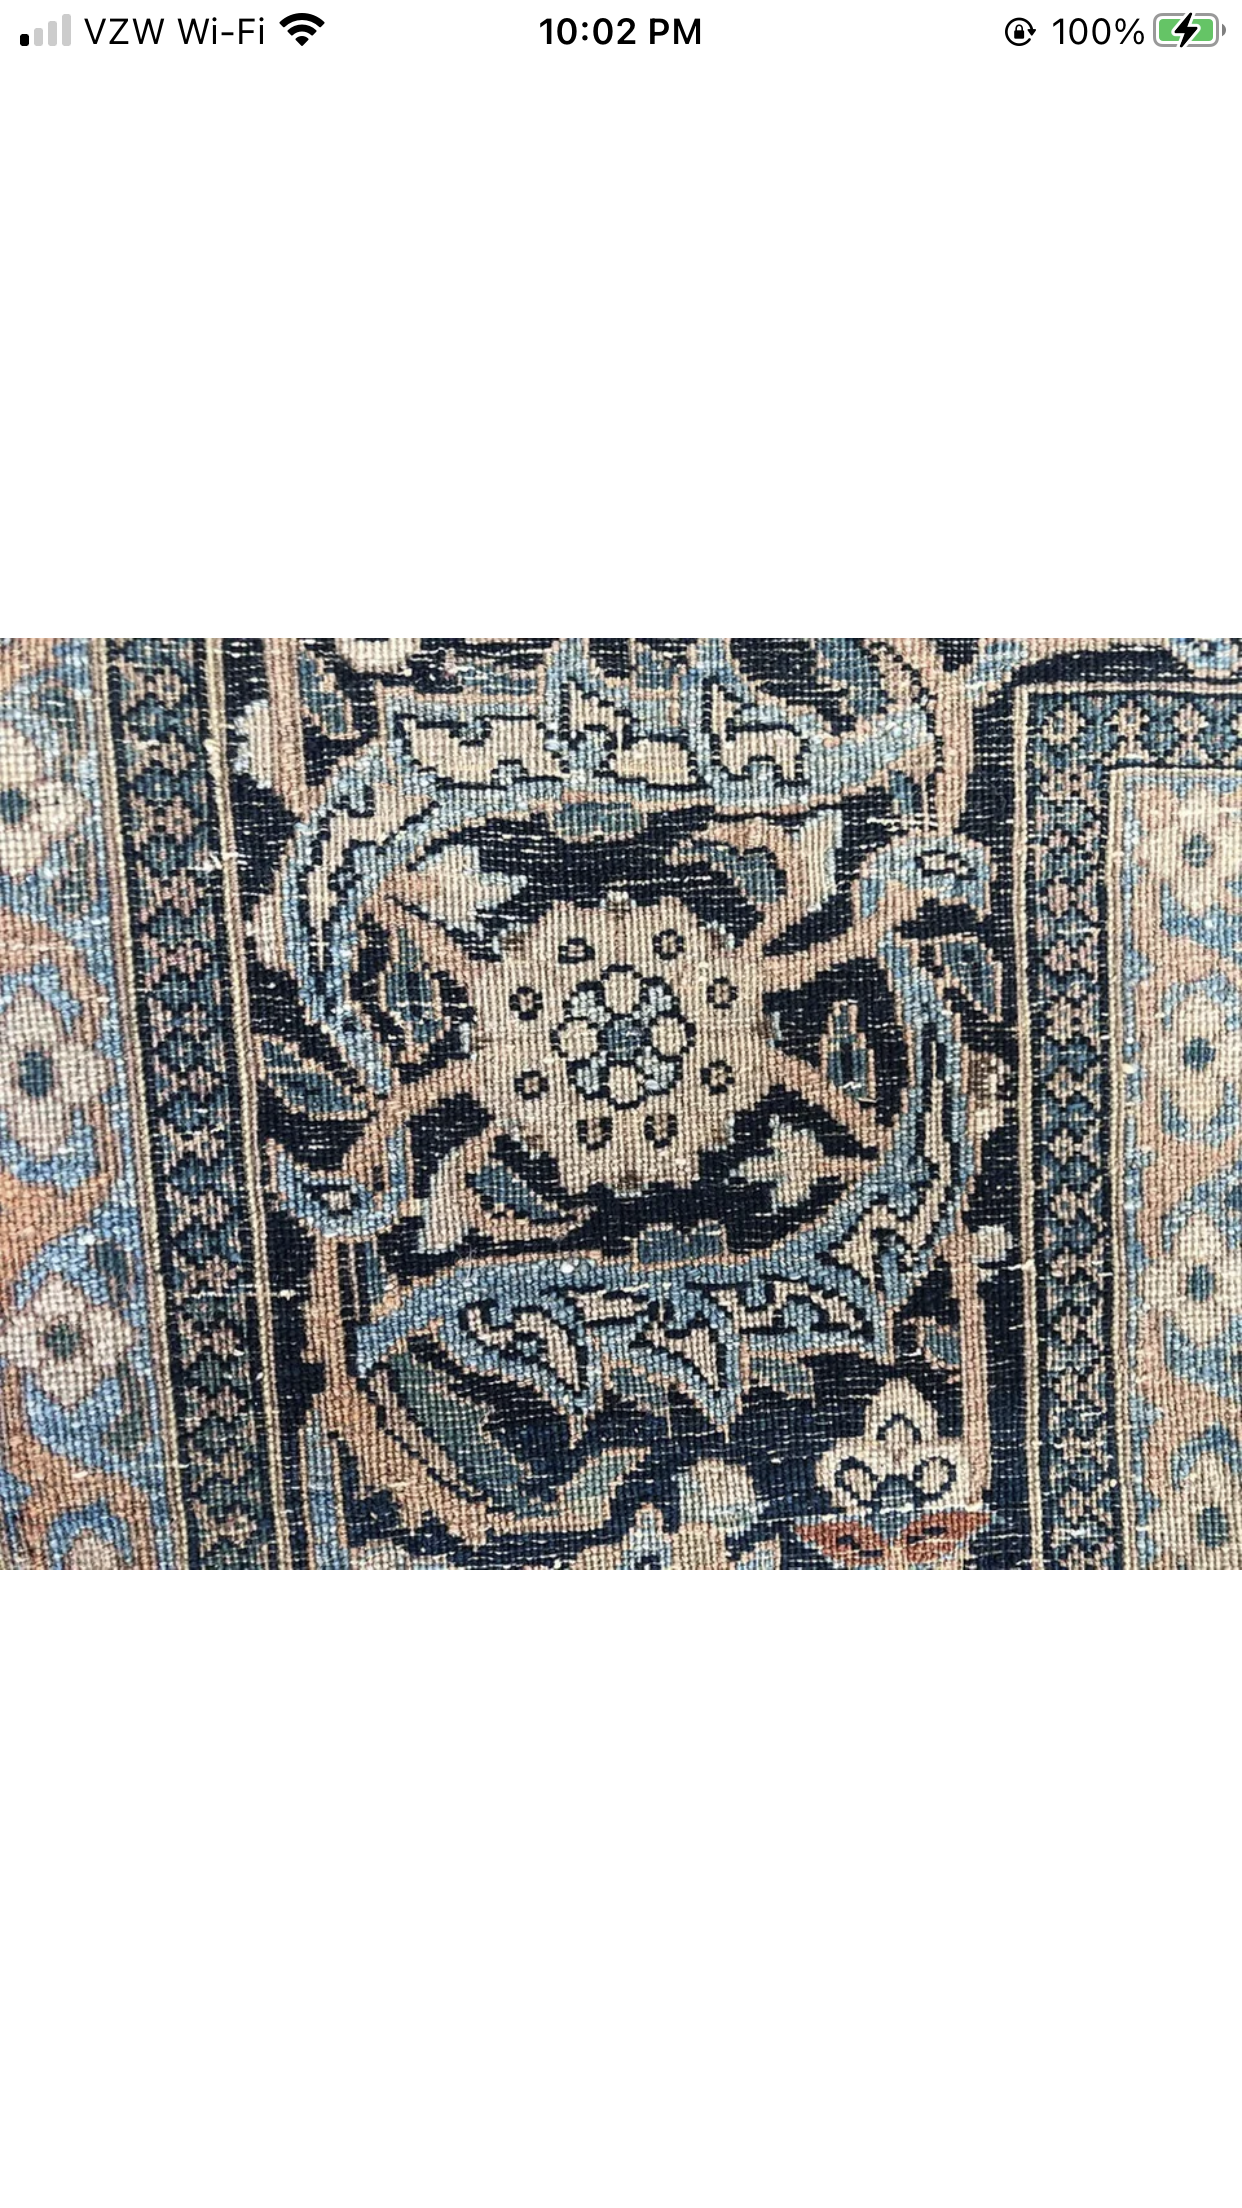 Antique Sensational Persian Isfahan Pattern Rug “ Tree Of Life” Drsign